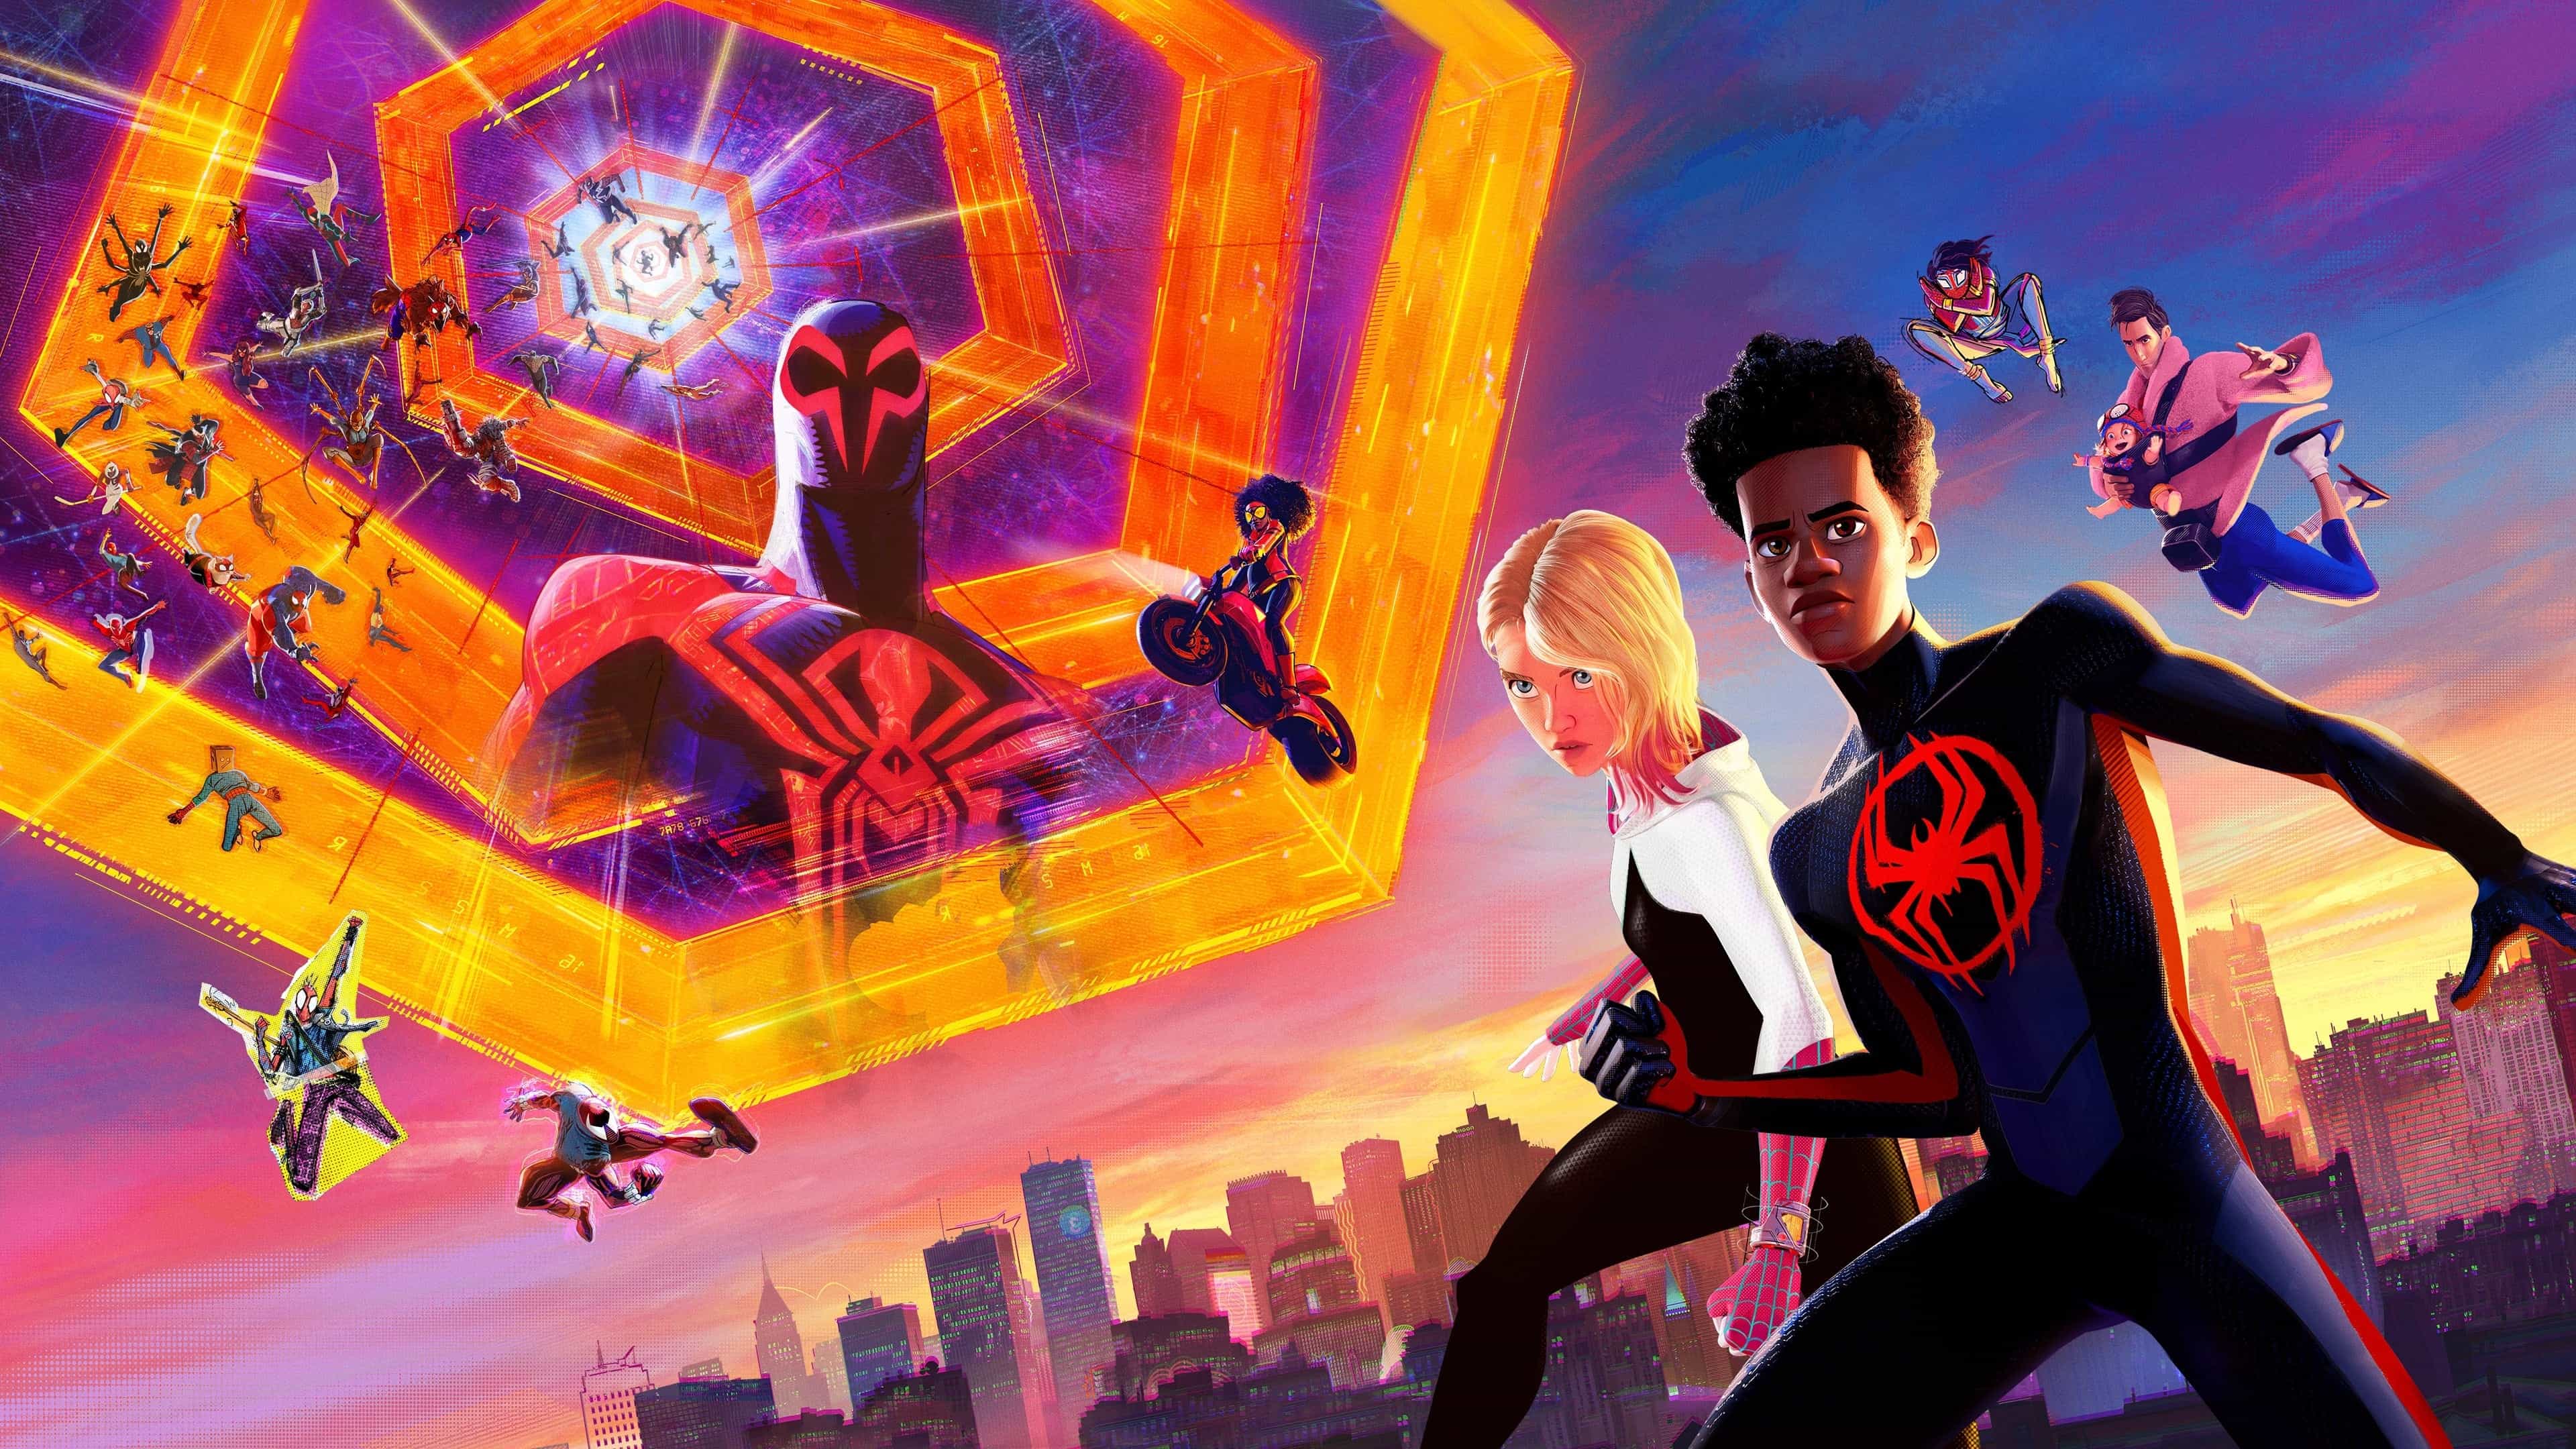 Exciting news for Spidey fans: Netflix drops the Spider-Man: Across the  Spider-Verse release date